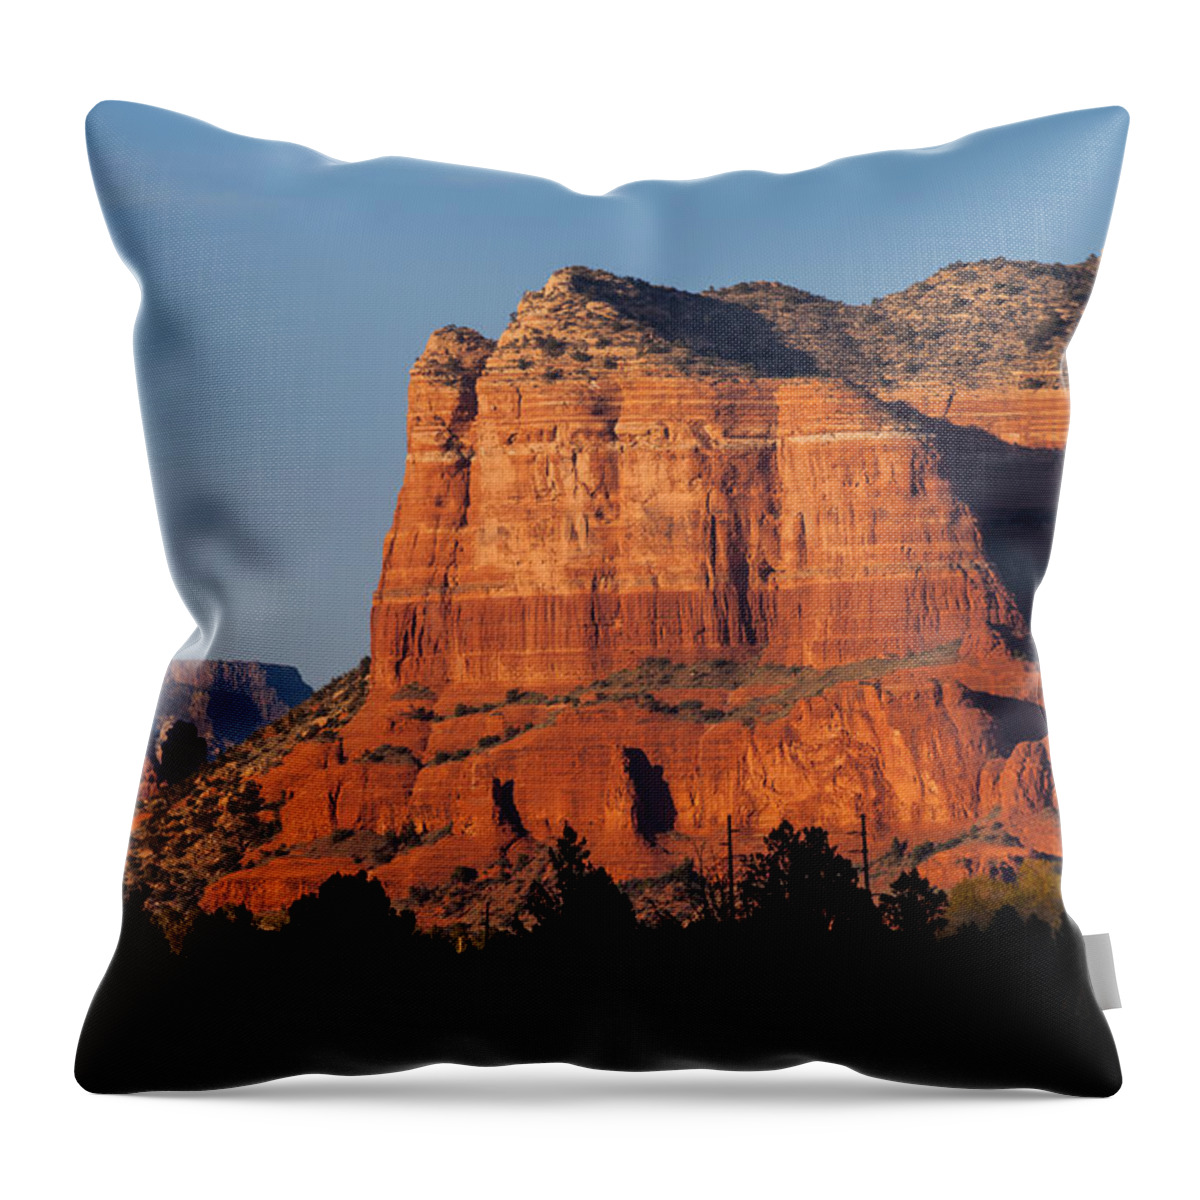  Throw Pillow featuring the photograph Courthouse Butte by Ed Gleichman